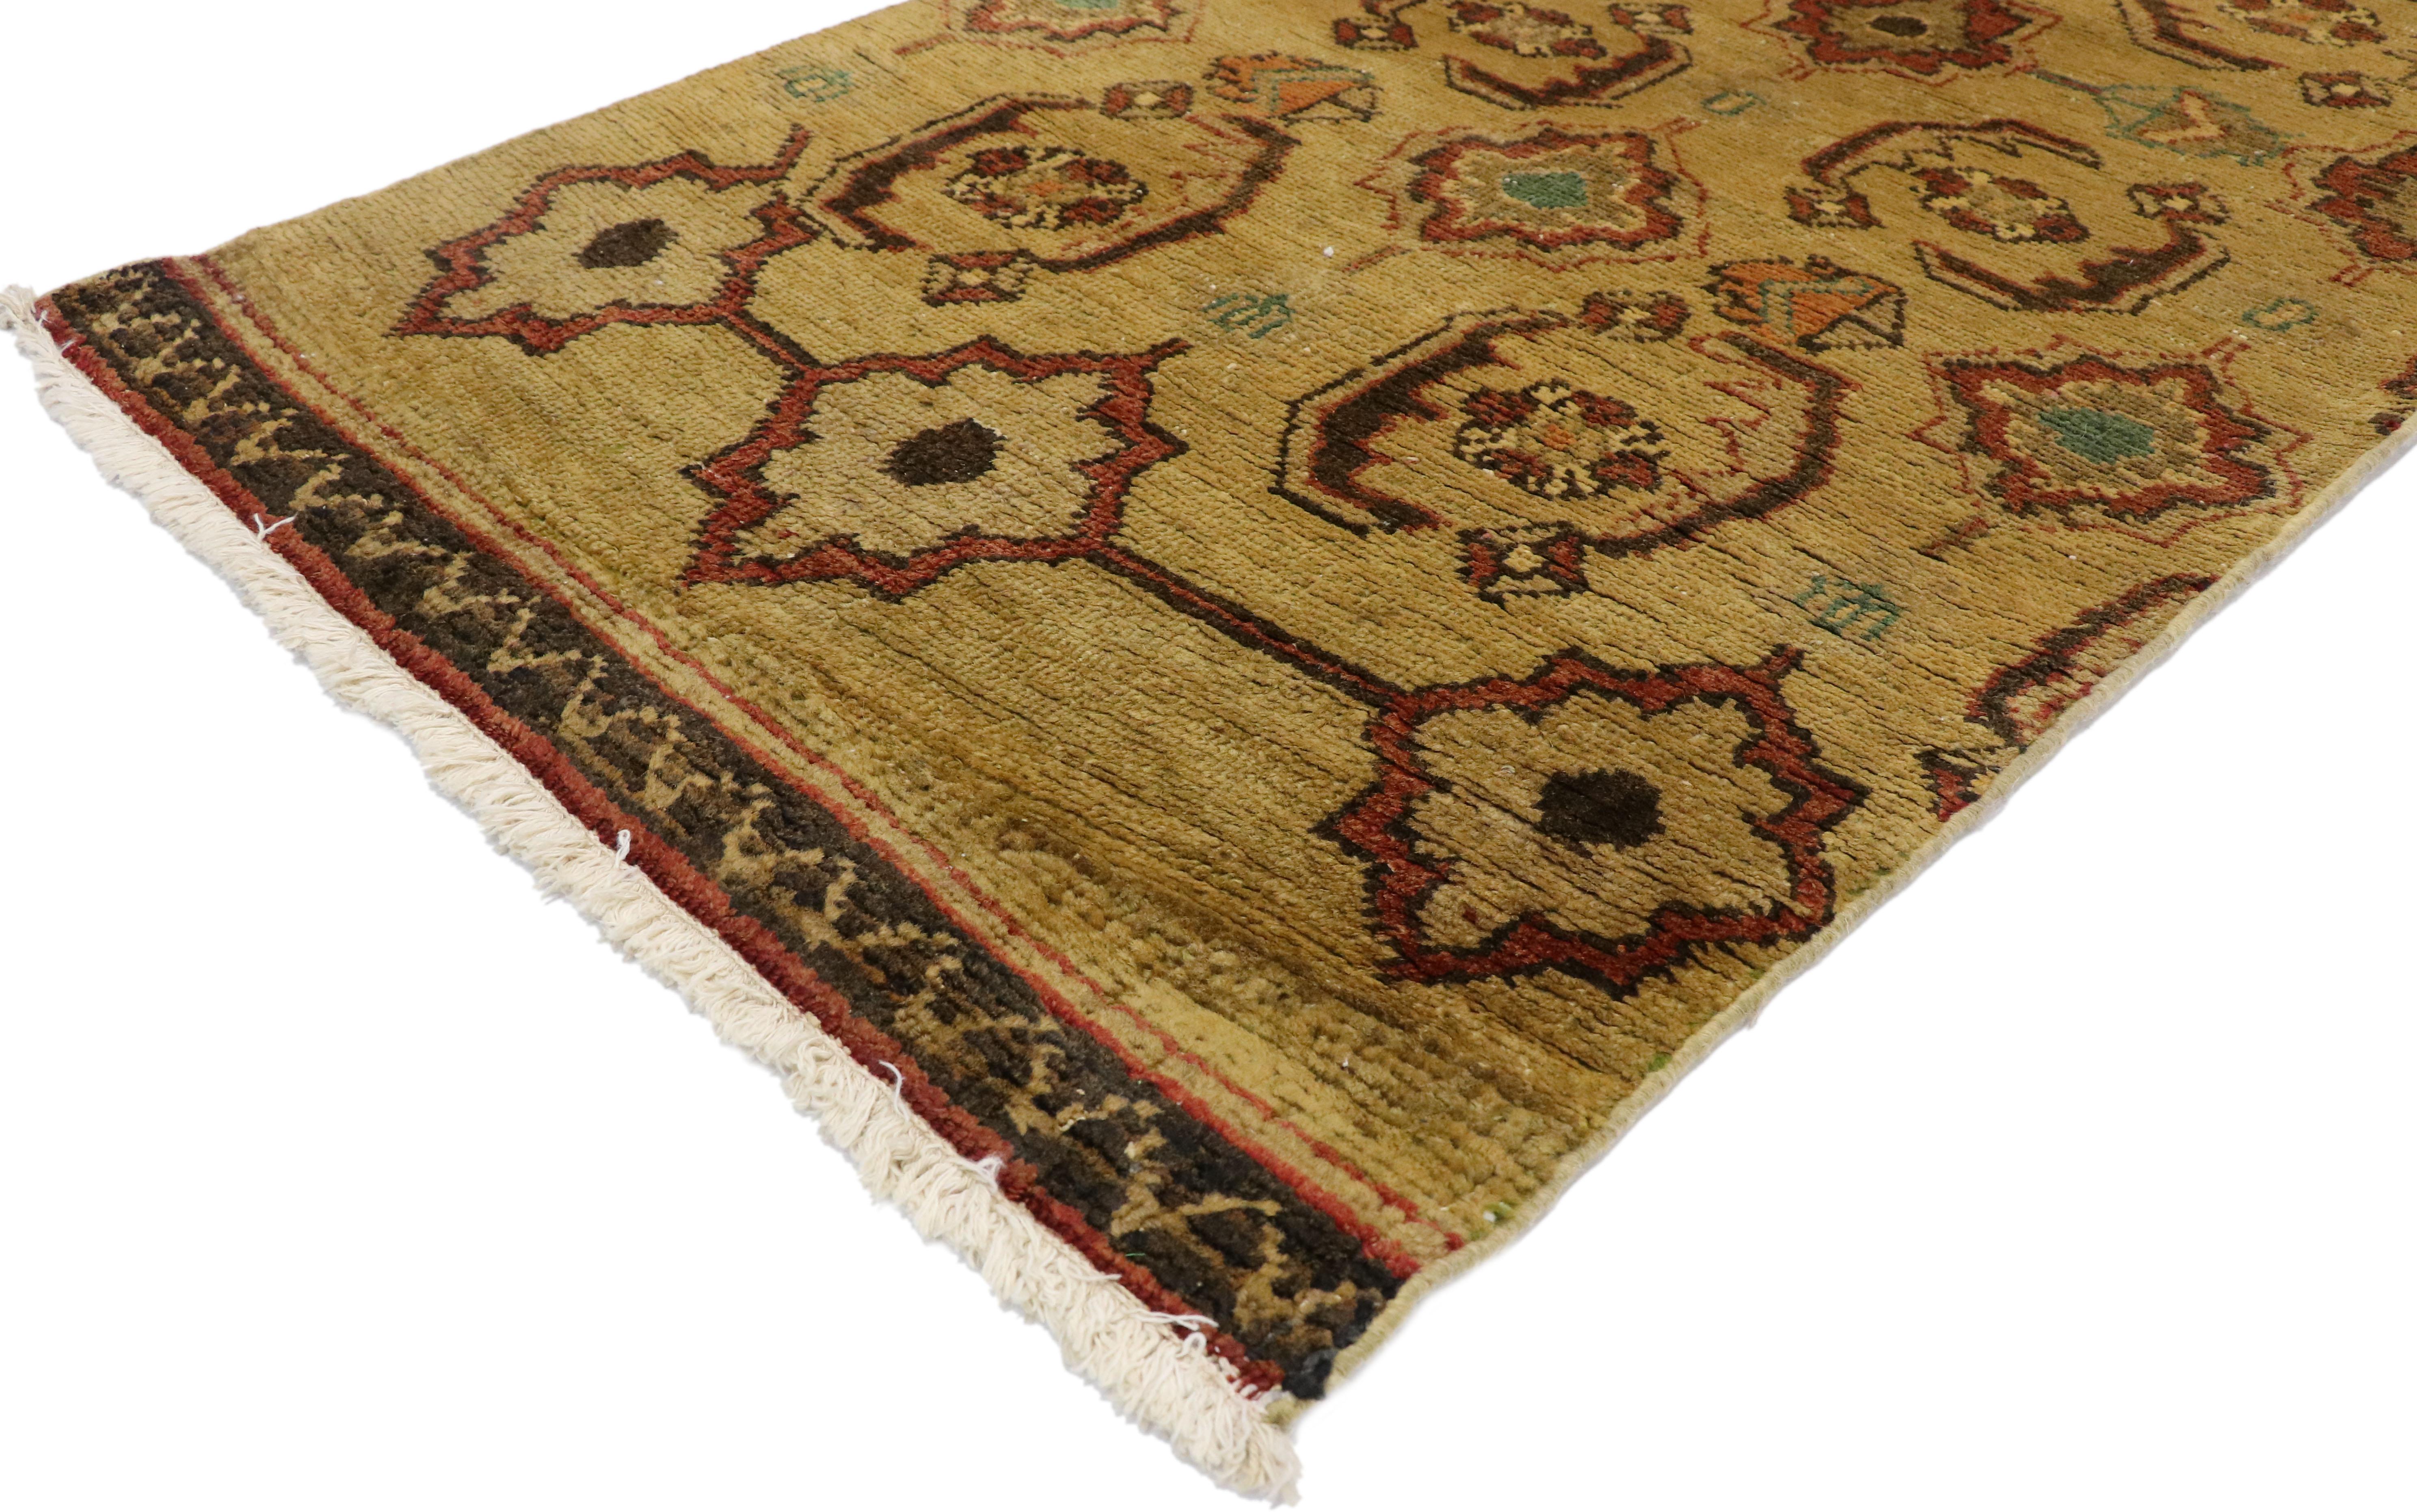 50463-50464 Pair of Vintage Turkish Oushak Carpet Runners with Rustic Arts and Crafts Style. Warm and inviting, this pair of hand-knotted wool vintage Turkish Oushak Runners embody Arts and Crafts style with rustic vibes. Each Oushak runner features